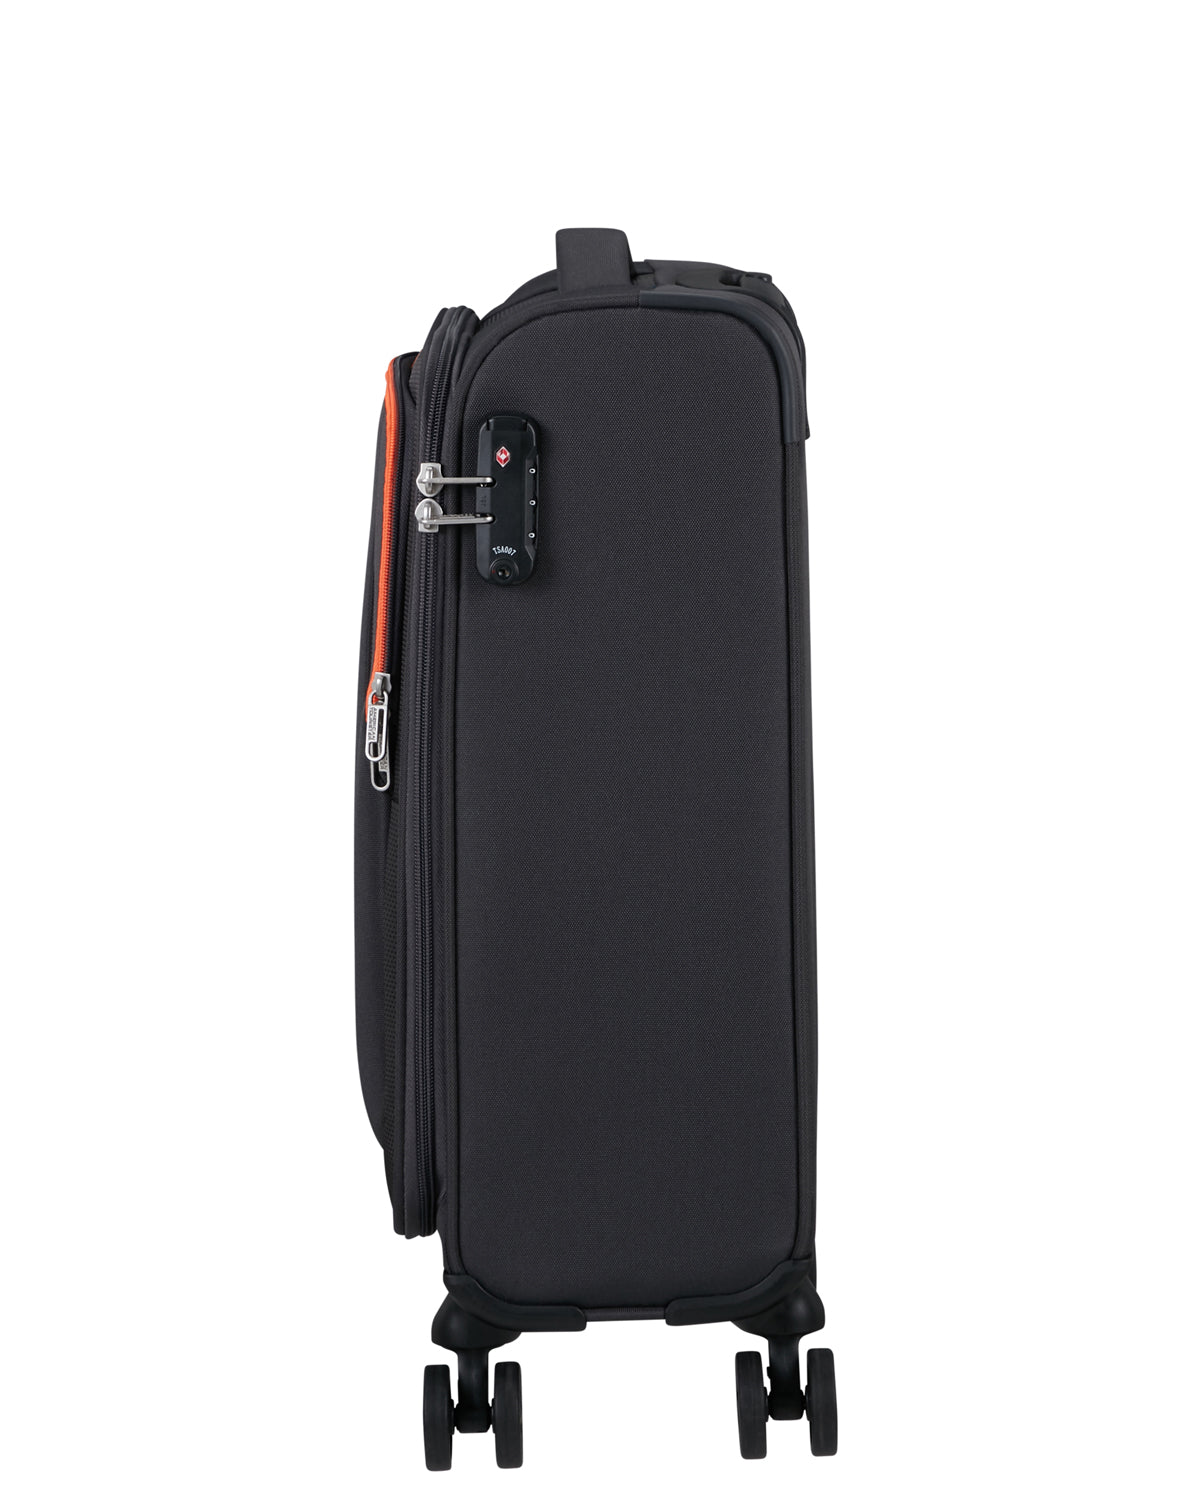 Grote Koffer soft AT by samsonite 80 x 47 x 28 cm